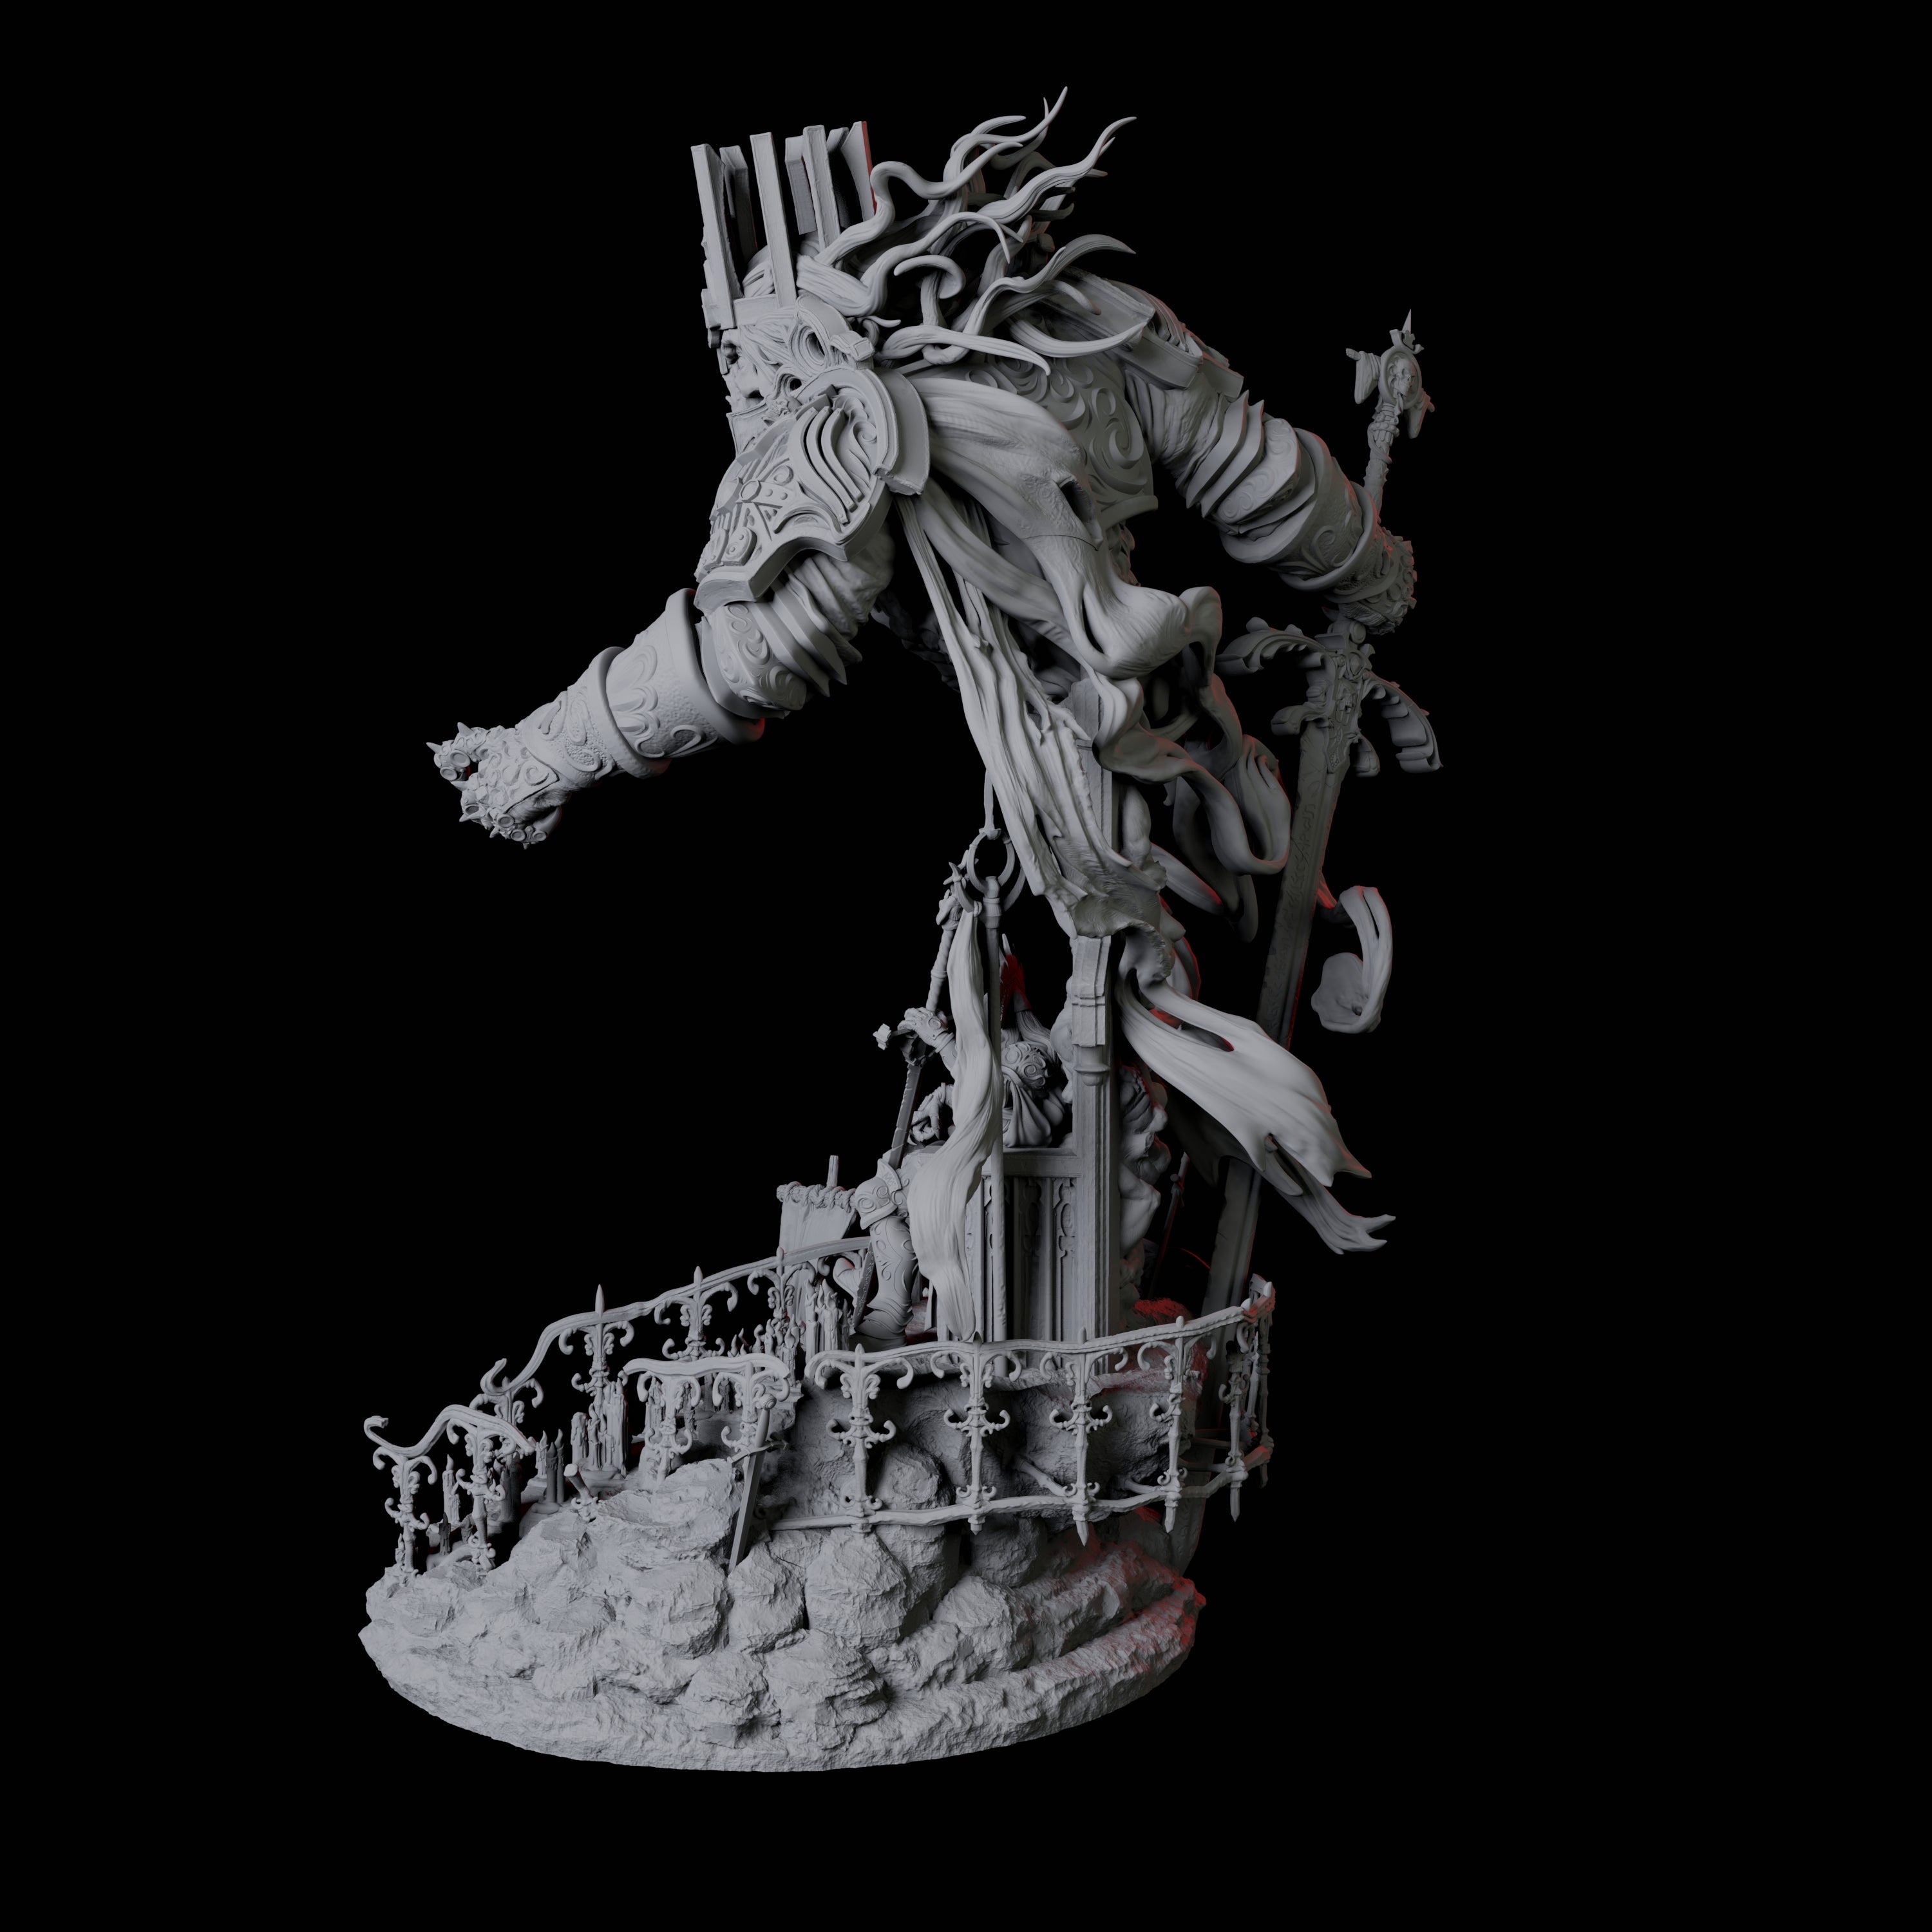 Armoured King on Throne with Lich Miniature for Dungeons and Dragons, Pathfinder or other TTRPGs